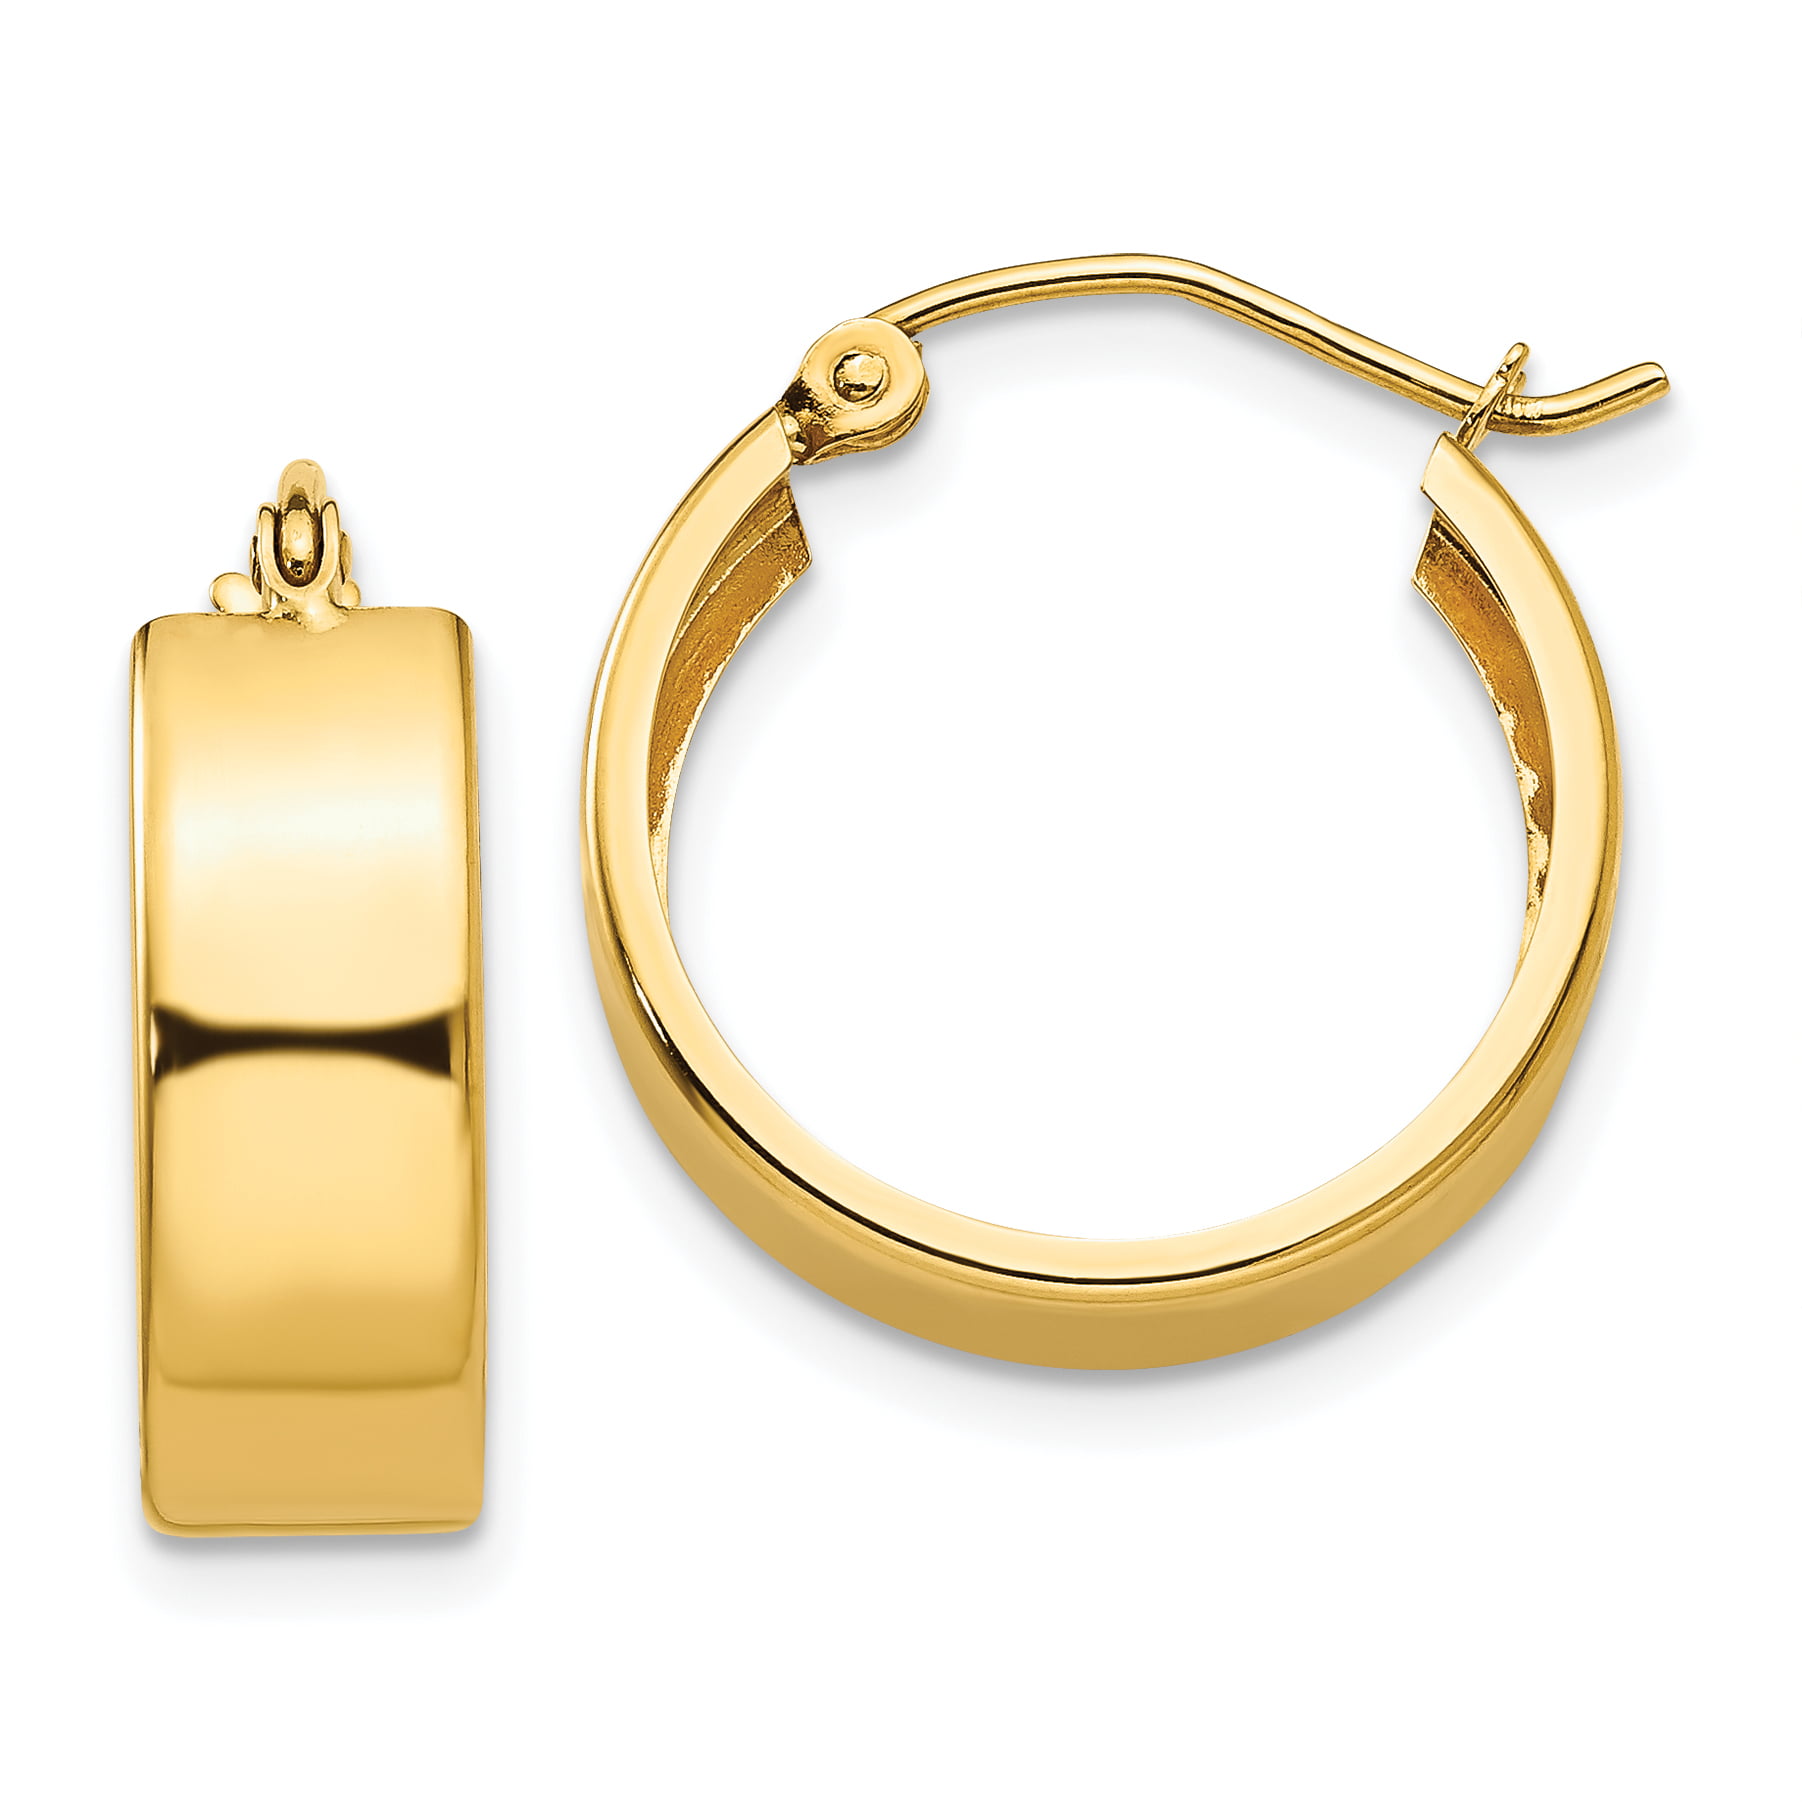 Roy Rose Jewelry 14K Yellow Gold Small Hoop Earrings ~ 9mm length 